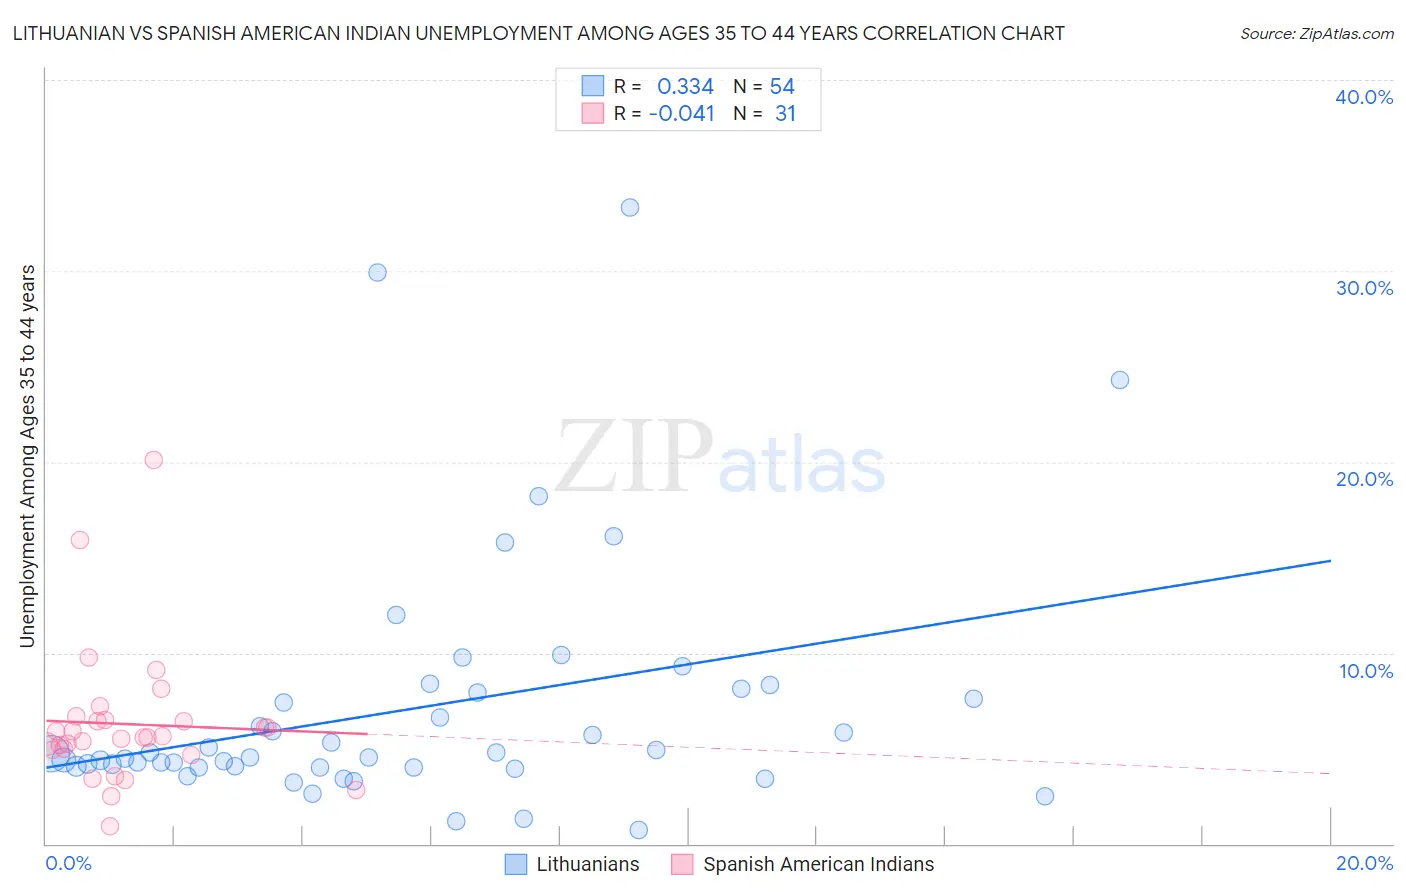 Lithuanian vs Spanish American Indian Unemployment Among Ages 35 to 44 years